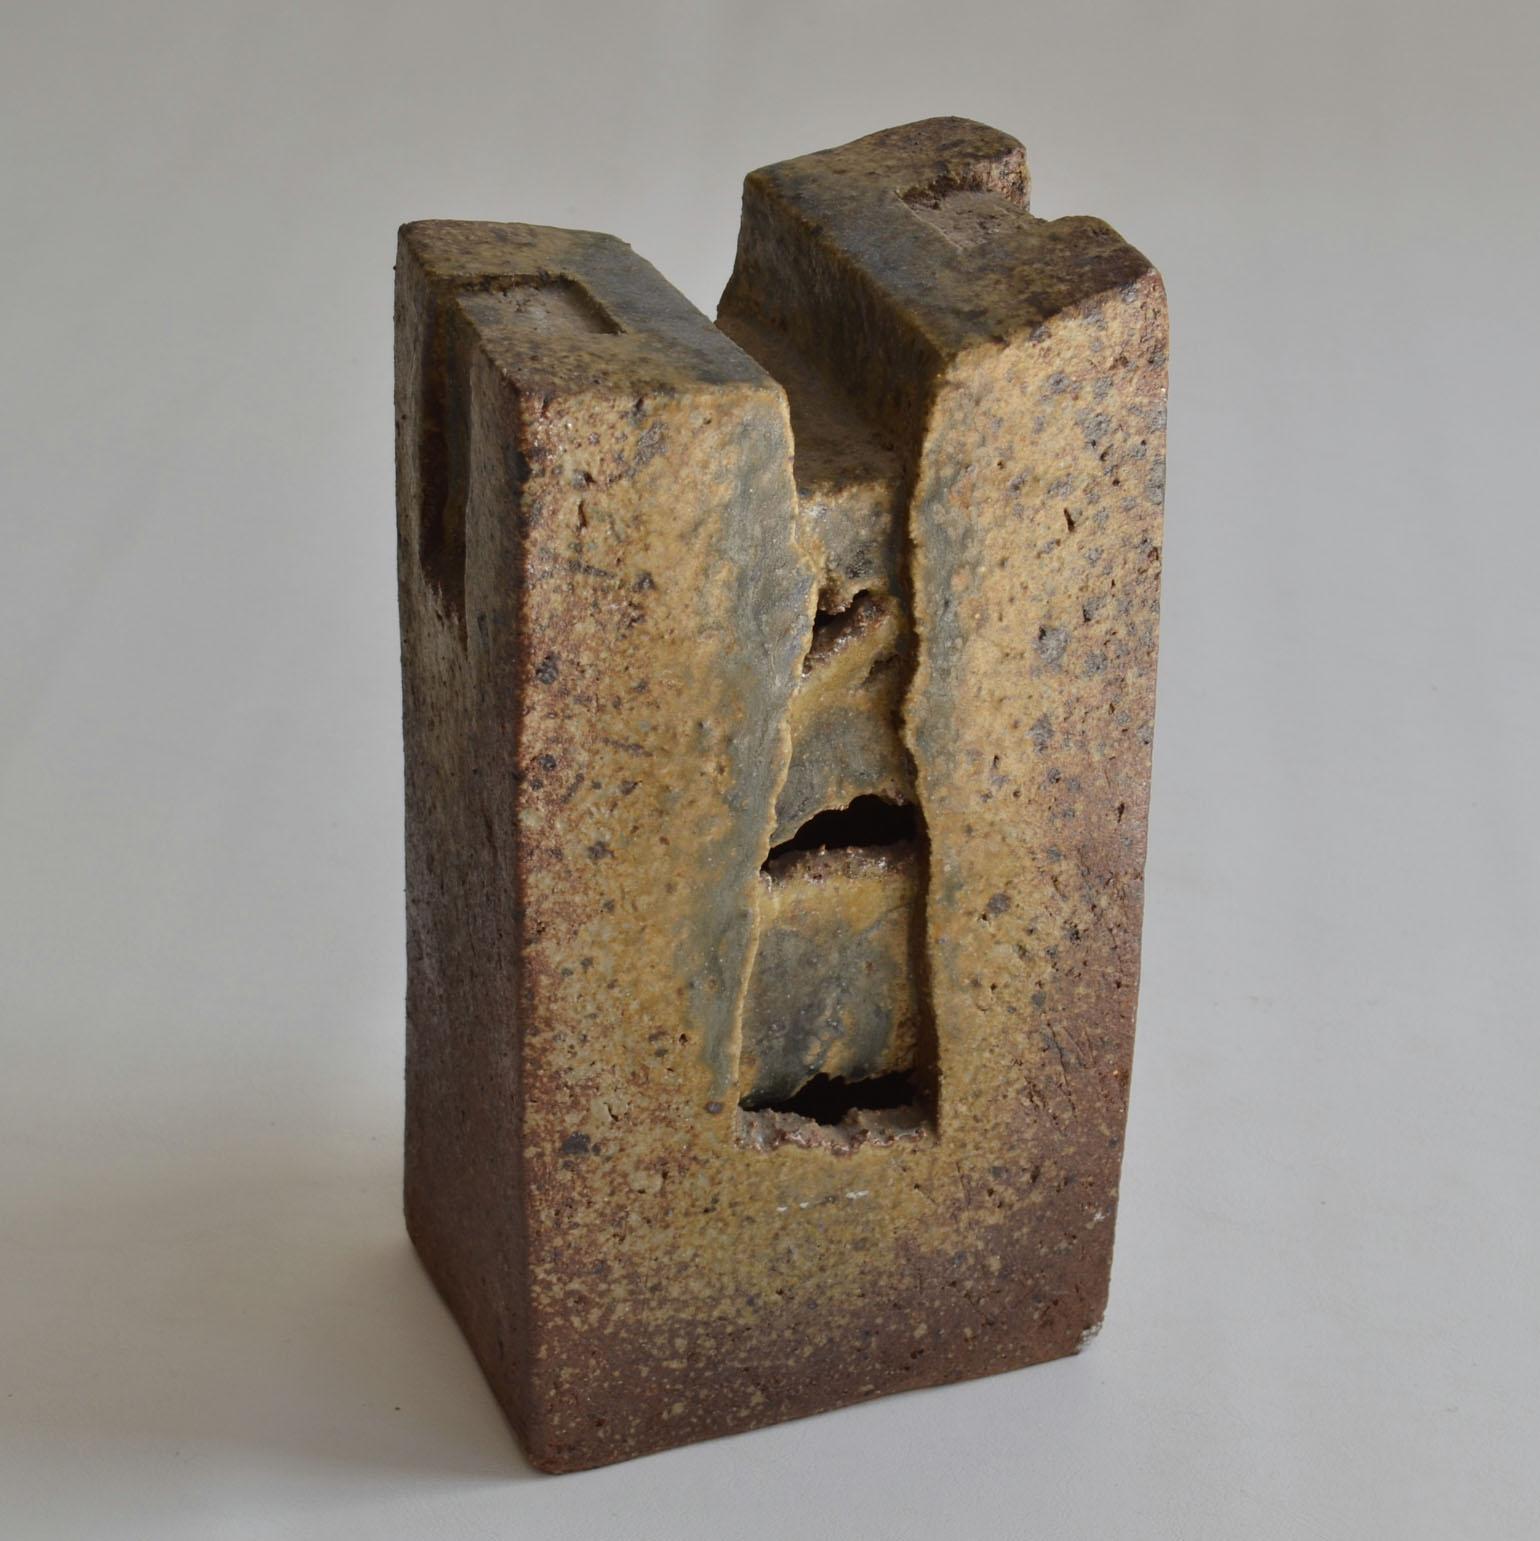 Architectural Abstract Ceramic Sculpture in Earth Tones In Excellent Condition For Sale In London, GB